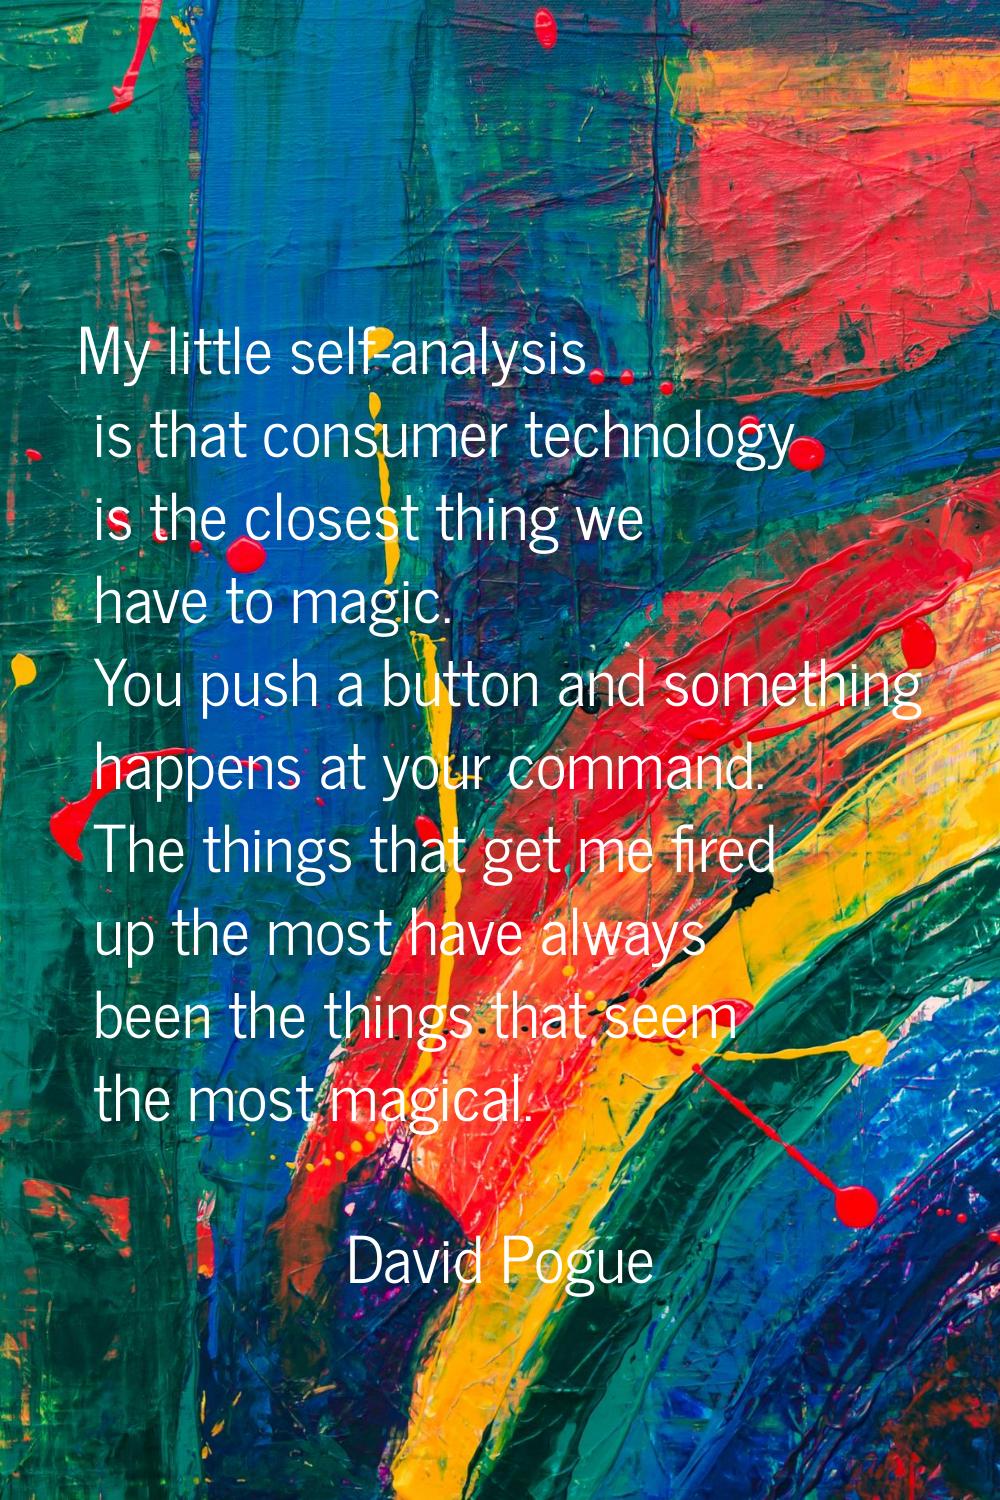 My little self-analysis is that consumer technology is the closest thing we have to magic. You push